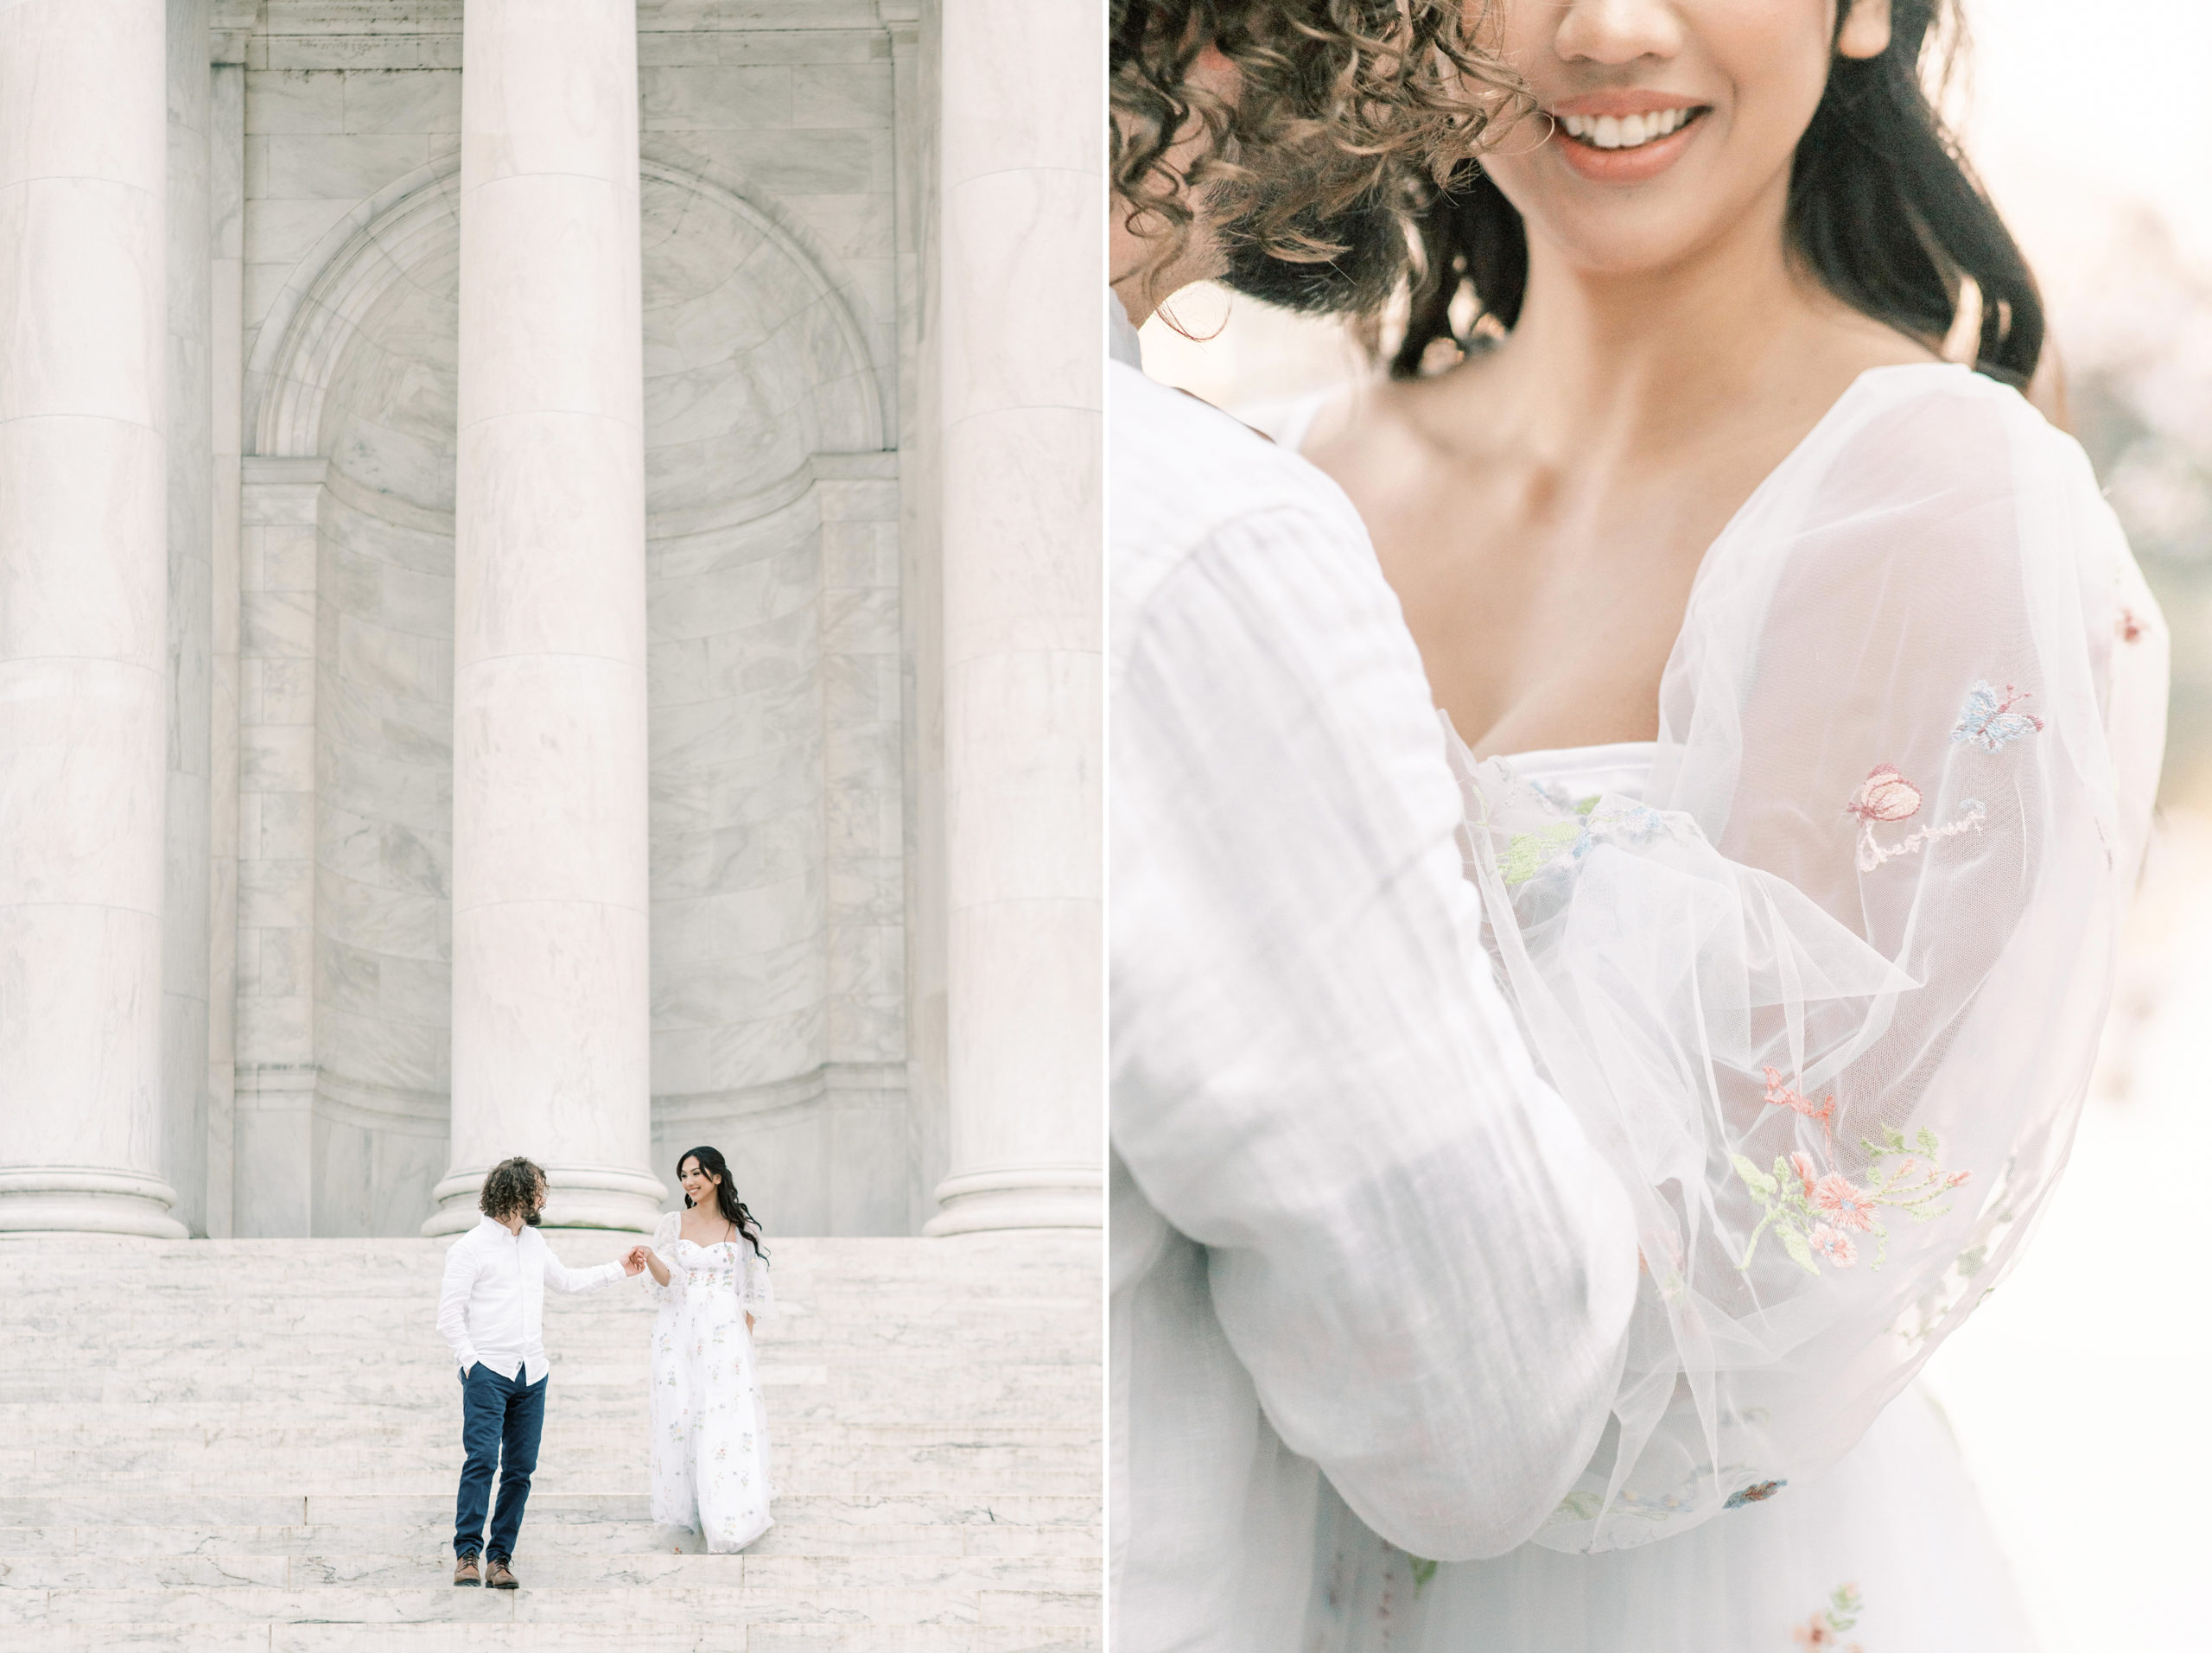 A traditional Cherry Blossom Engagement Session in Washington, DC featuring portraits at the Tidal Basin and Jefferson Memorial.